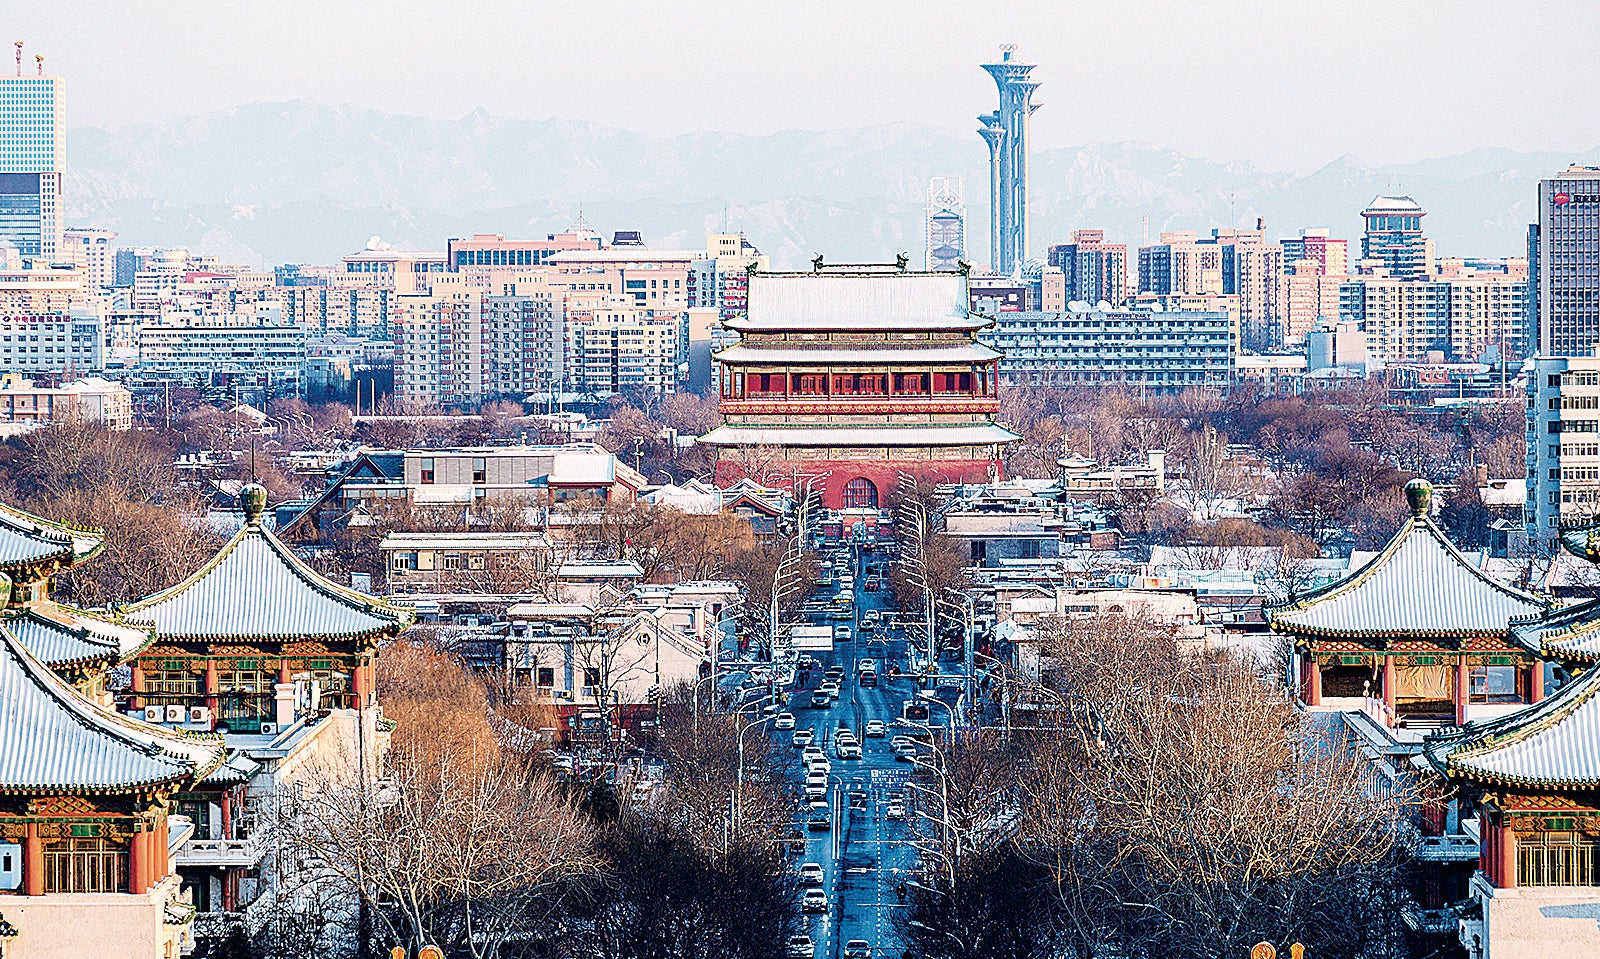 The central axis stretches 4.8 miles through the Chinese capital